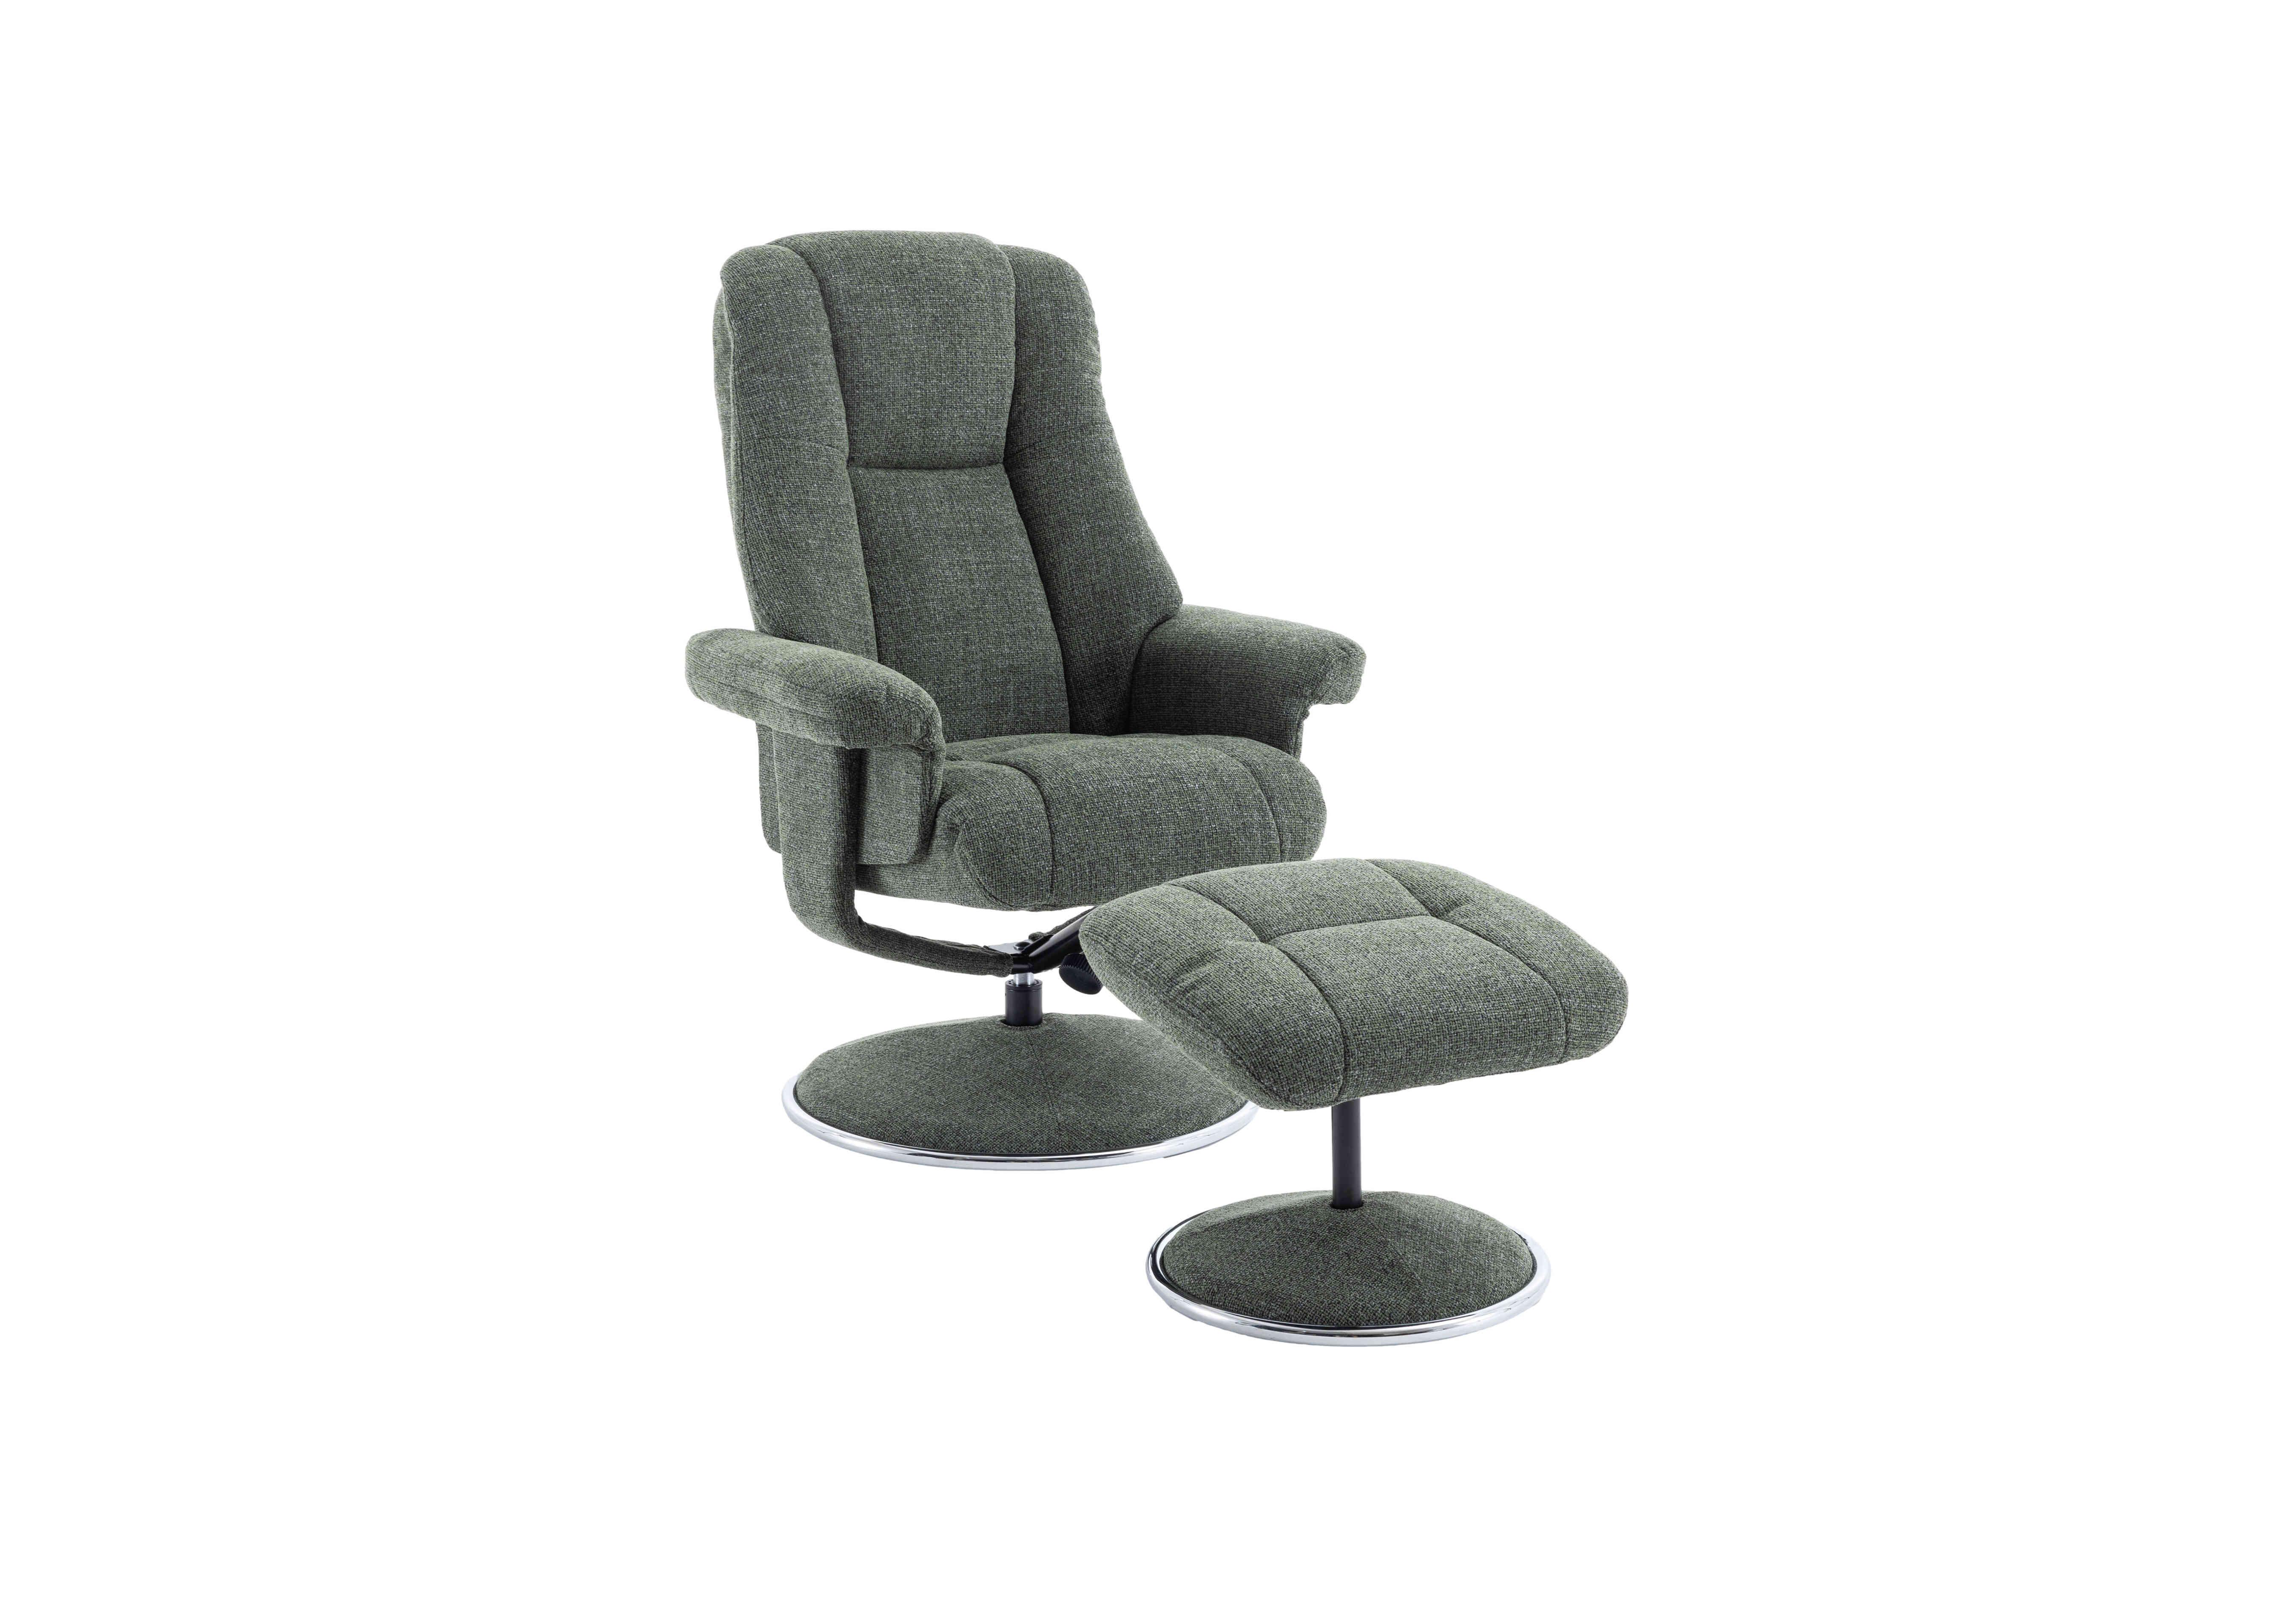 Troyes Fabric High-Back 360 Swivel Chair and Footstool in Chacha Fern on Furniture Village